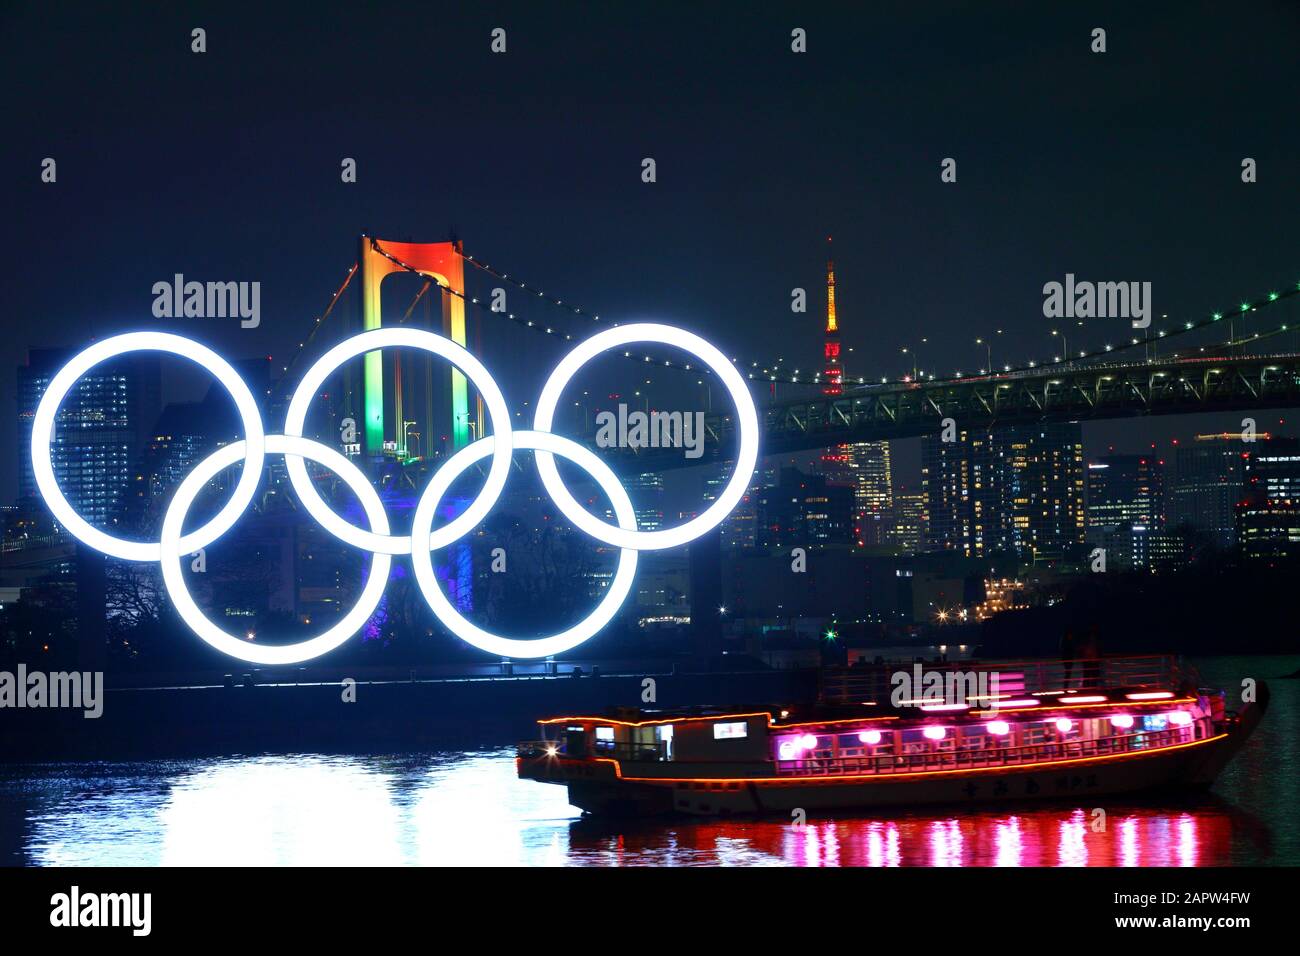 General view, JANUARY 24, 2020 : The Olympic Symbol is inaugurated at Odaiba Marine Park water area to commemorate the exact half-year mark before the start of the Olympic Games Tokyo 2020, Tokyo, Japan. (Photo by Naoki Nishimura/AFLO SPORT) Stock Photo